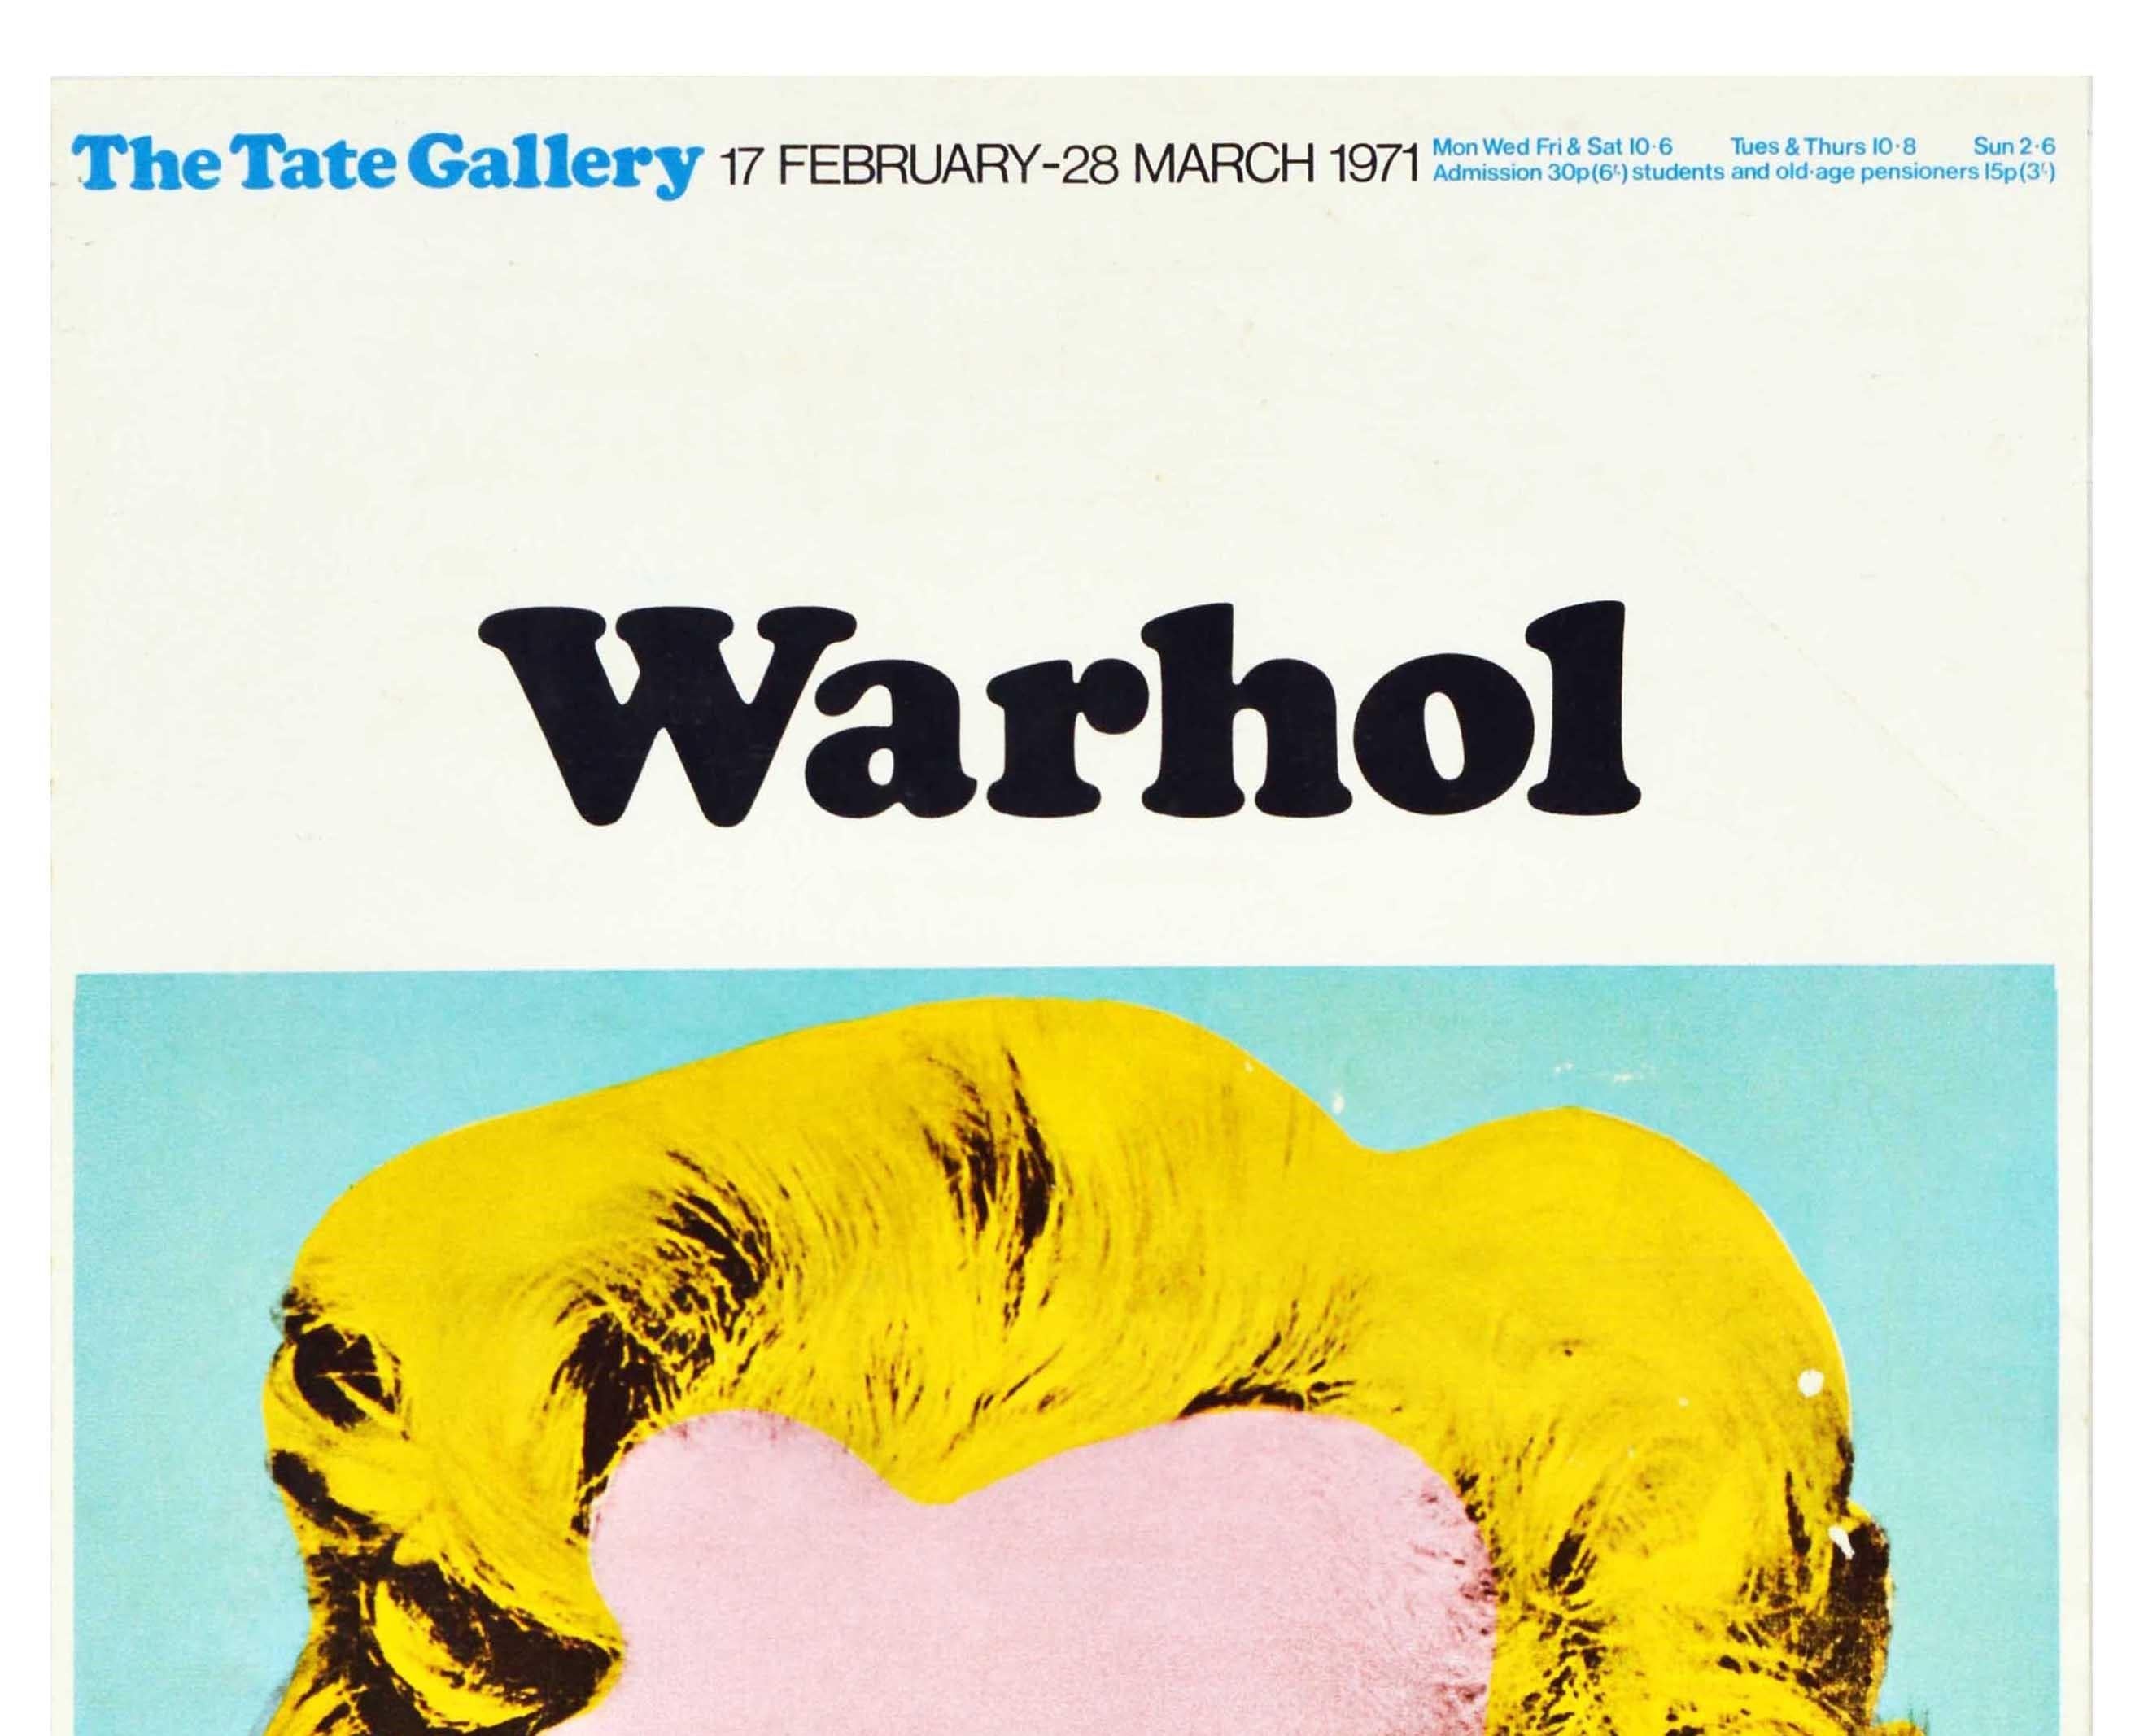 Original vintage advertising poster for a Warhol pop art exhibition at the Tate Gallery held from 17 February to 28 March 1971. Colourful design featuring the iconic 1964 silkscreen painting of the actress Marilyn Monroe (1926-1962) by the notable